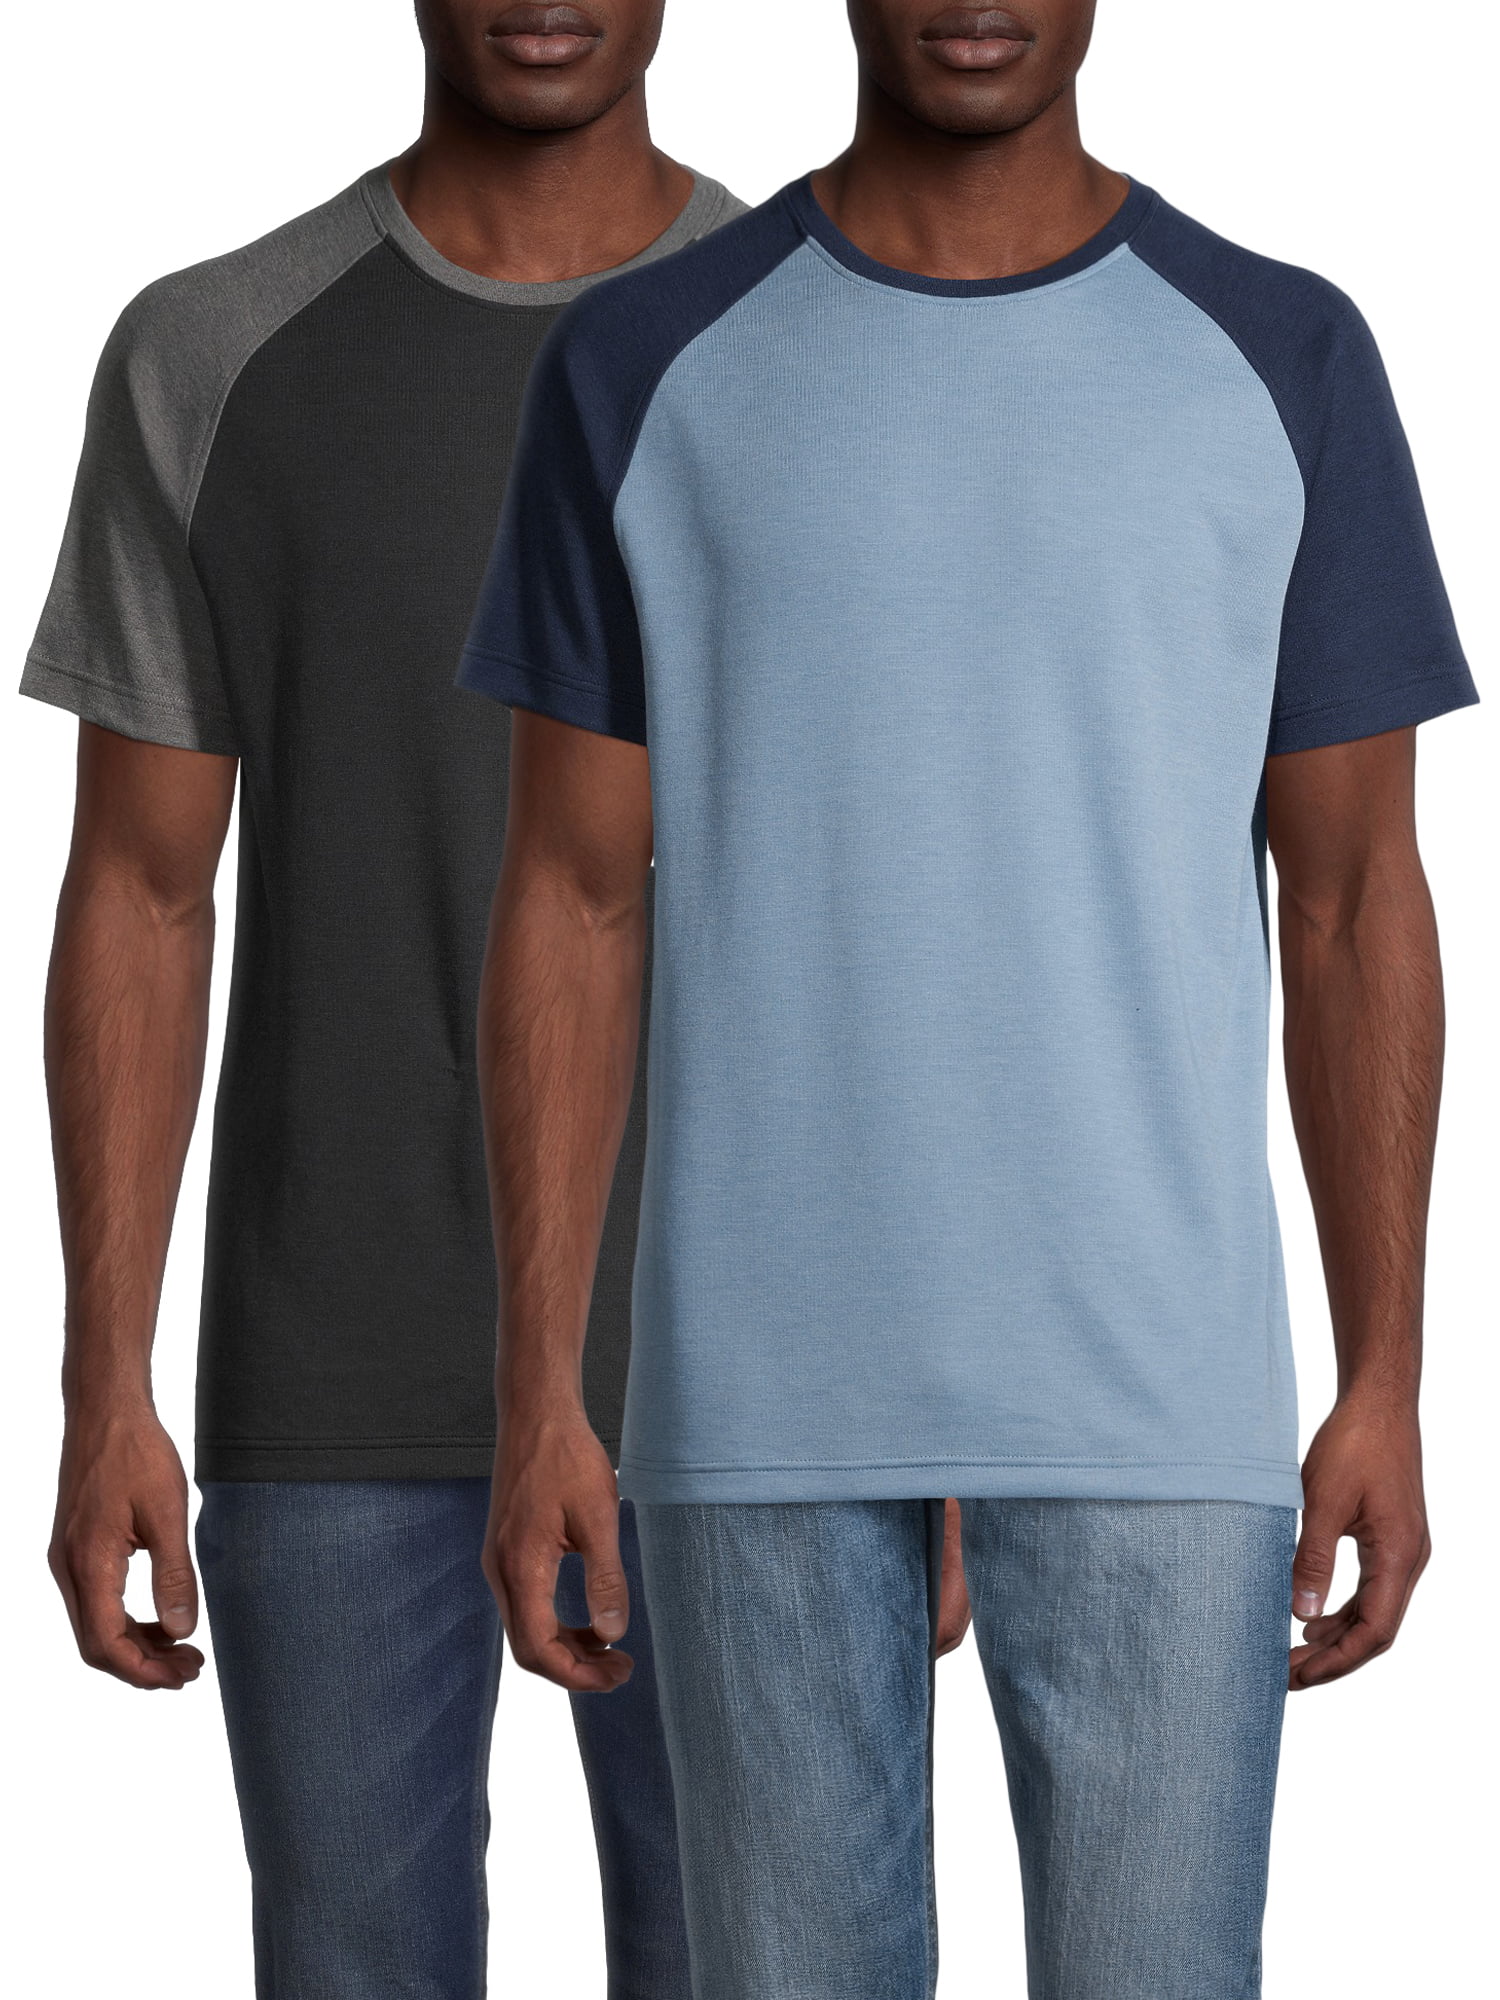 GEORGE George Men S And Big Men S Raglan T Shirt 2 Pack Up To Size